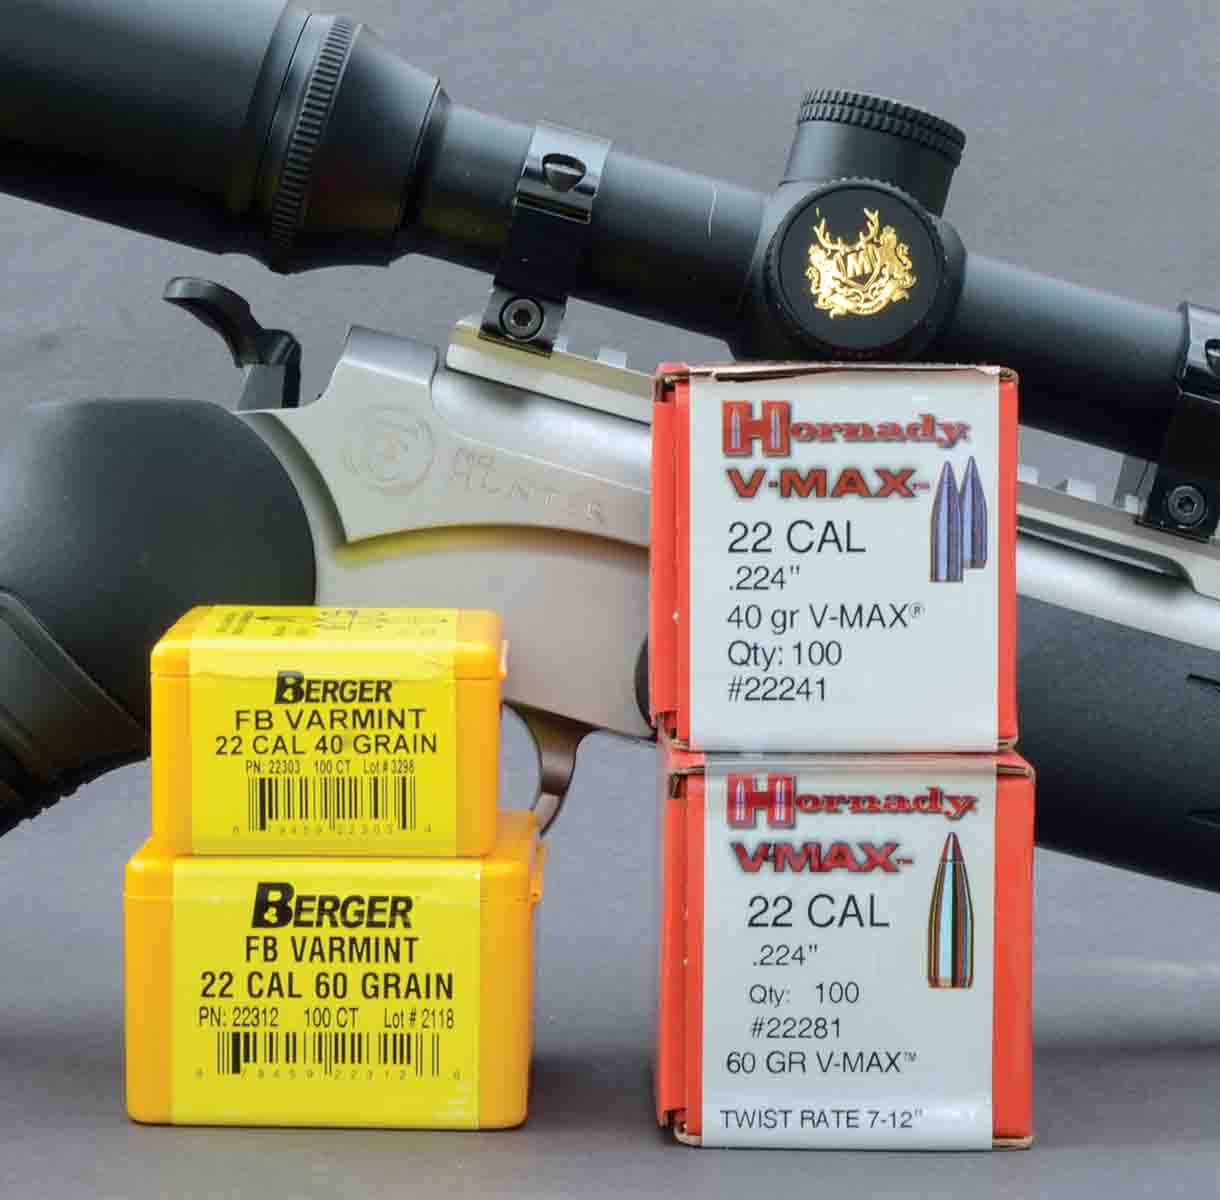 The Shilen barrel’s 1:9 twist proved to be an excellent choice for use with .224-inch bullets ranging from 40 to 60 grains in weight.